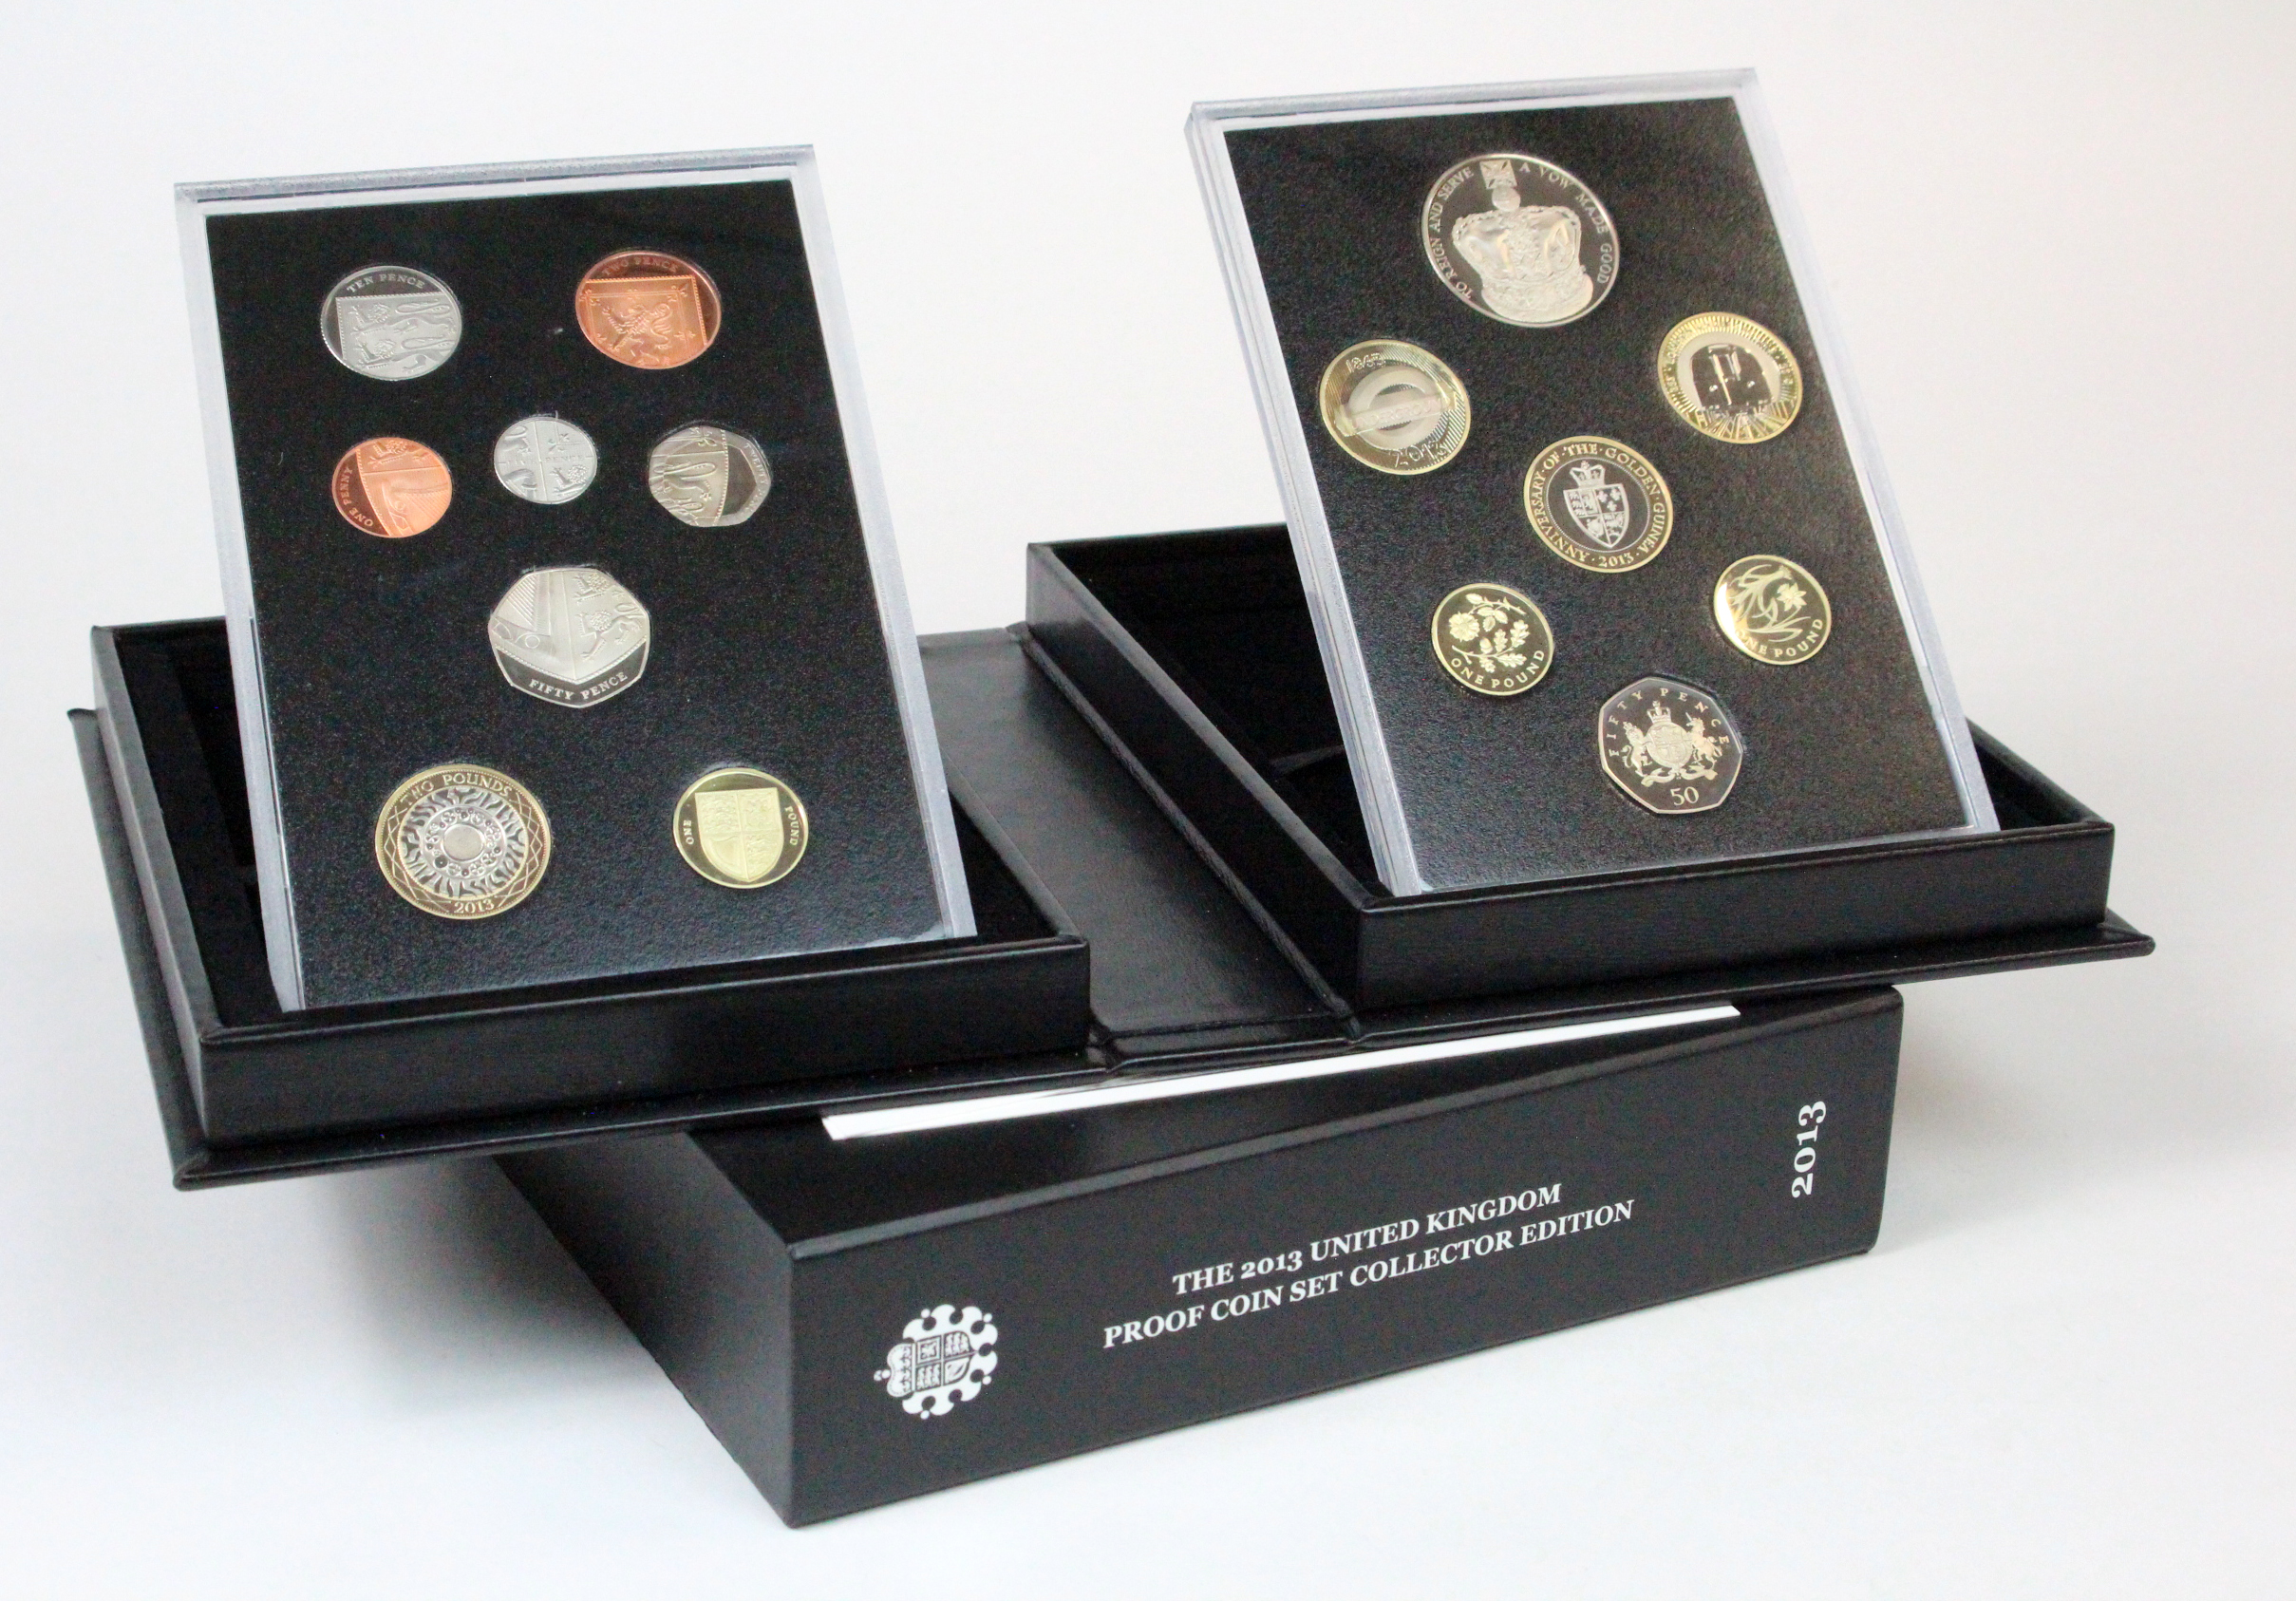 Royal Mint: The 2013 United Kingdom Proof Coin Set Collector Edition aFDC (a tiny bit of toning)